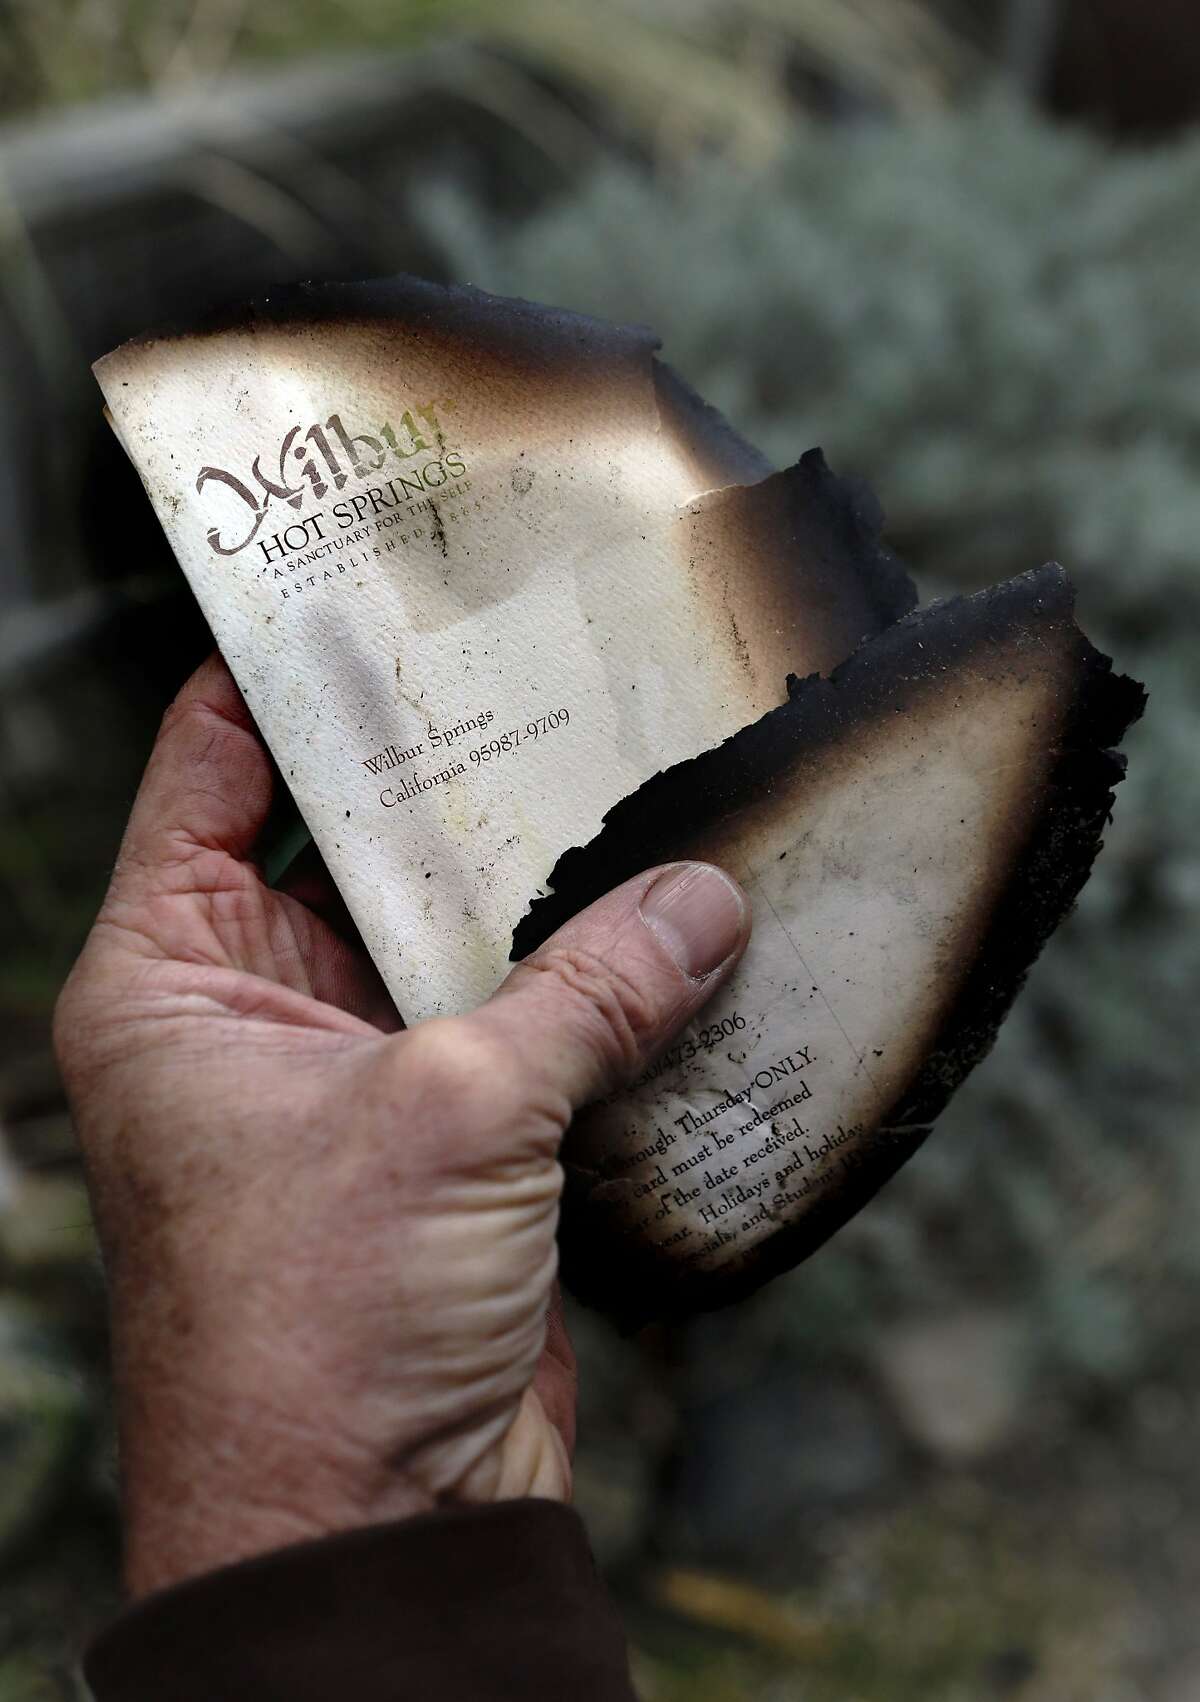 Maintenance worker Joel Main holds pieces of burned stationary from the lodge, on Friday April 4, 2014, near Williams, Calif. The owners and employees of Wilbur Hot Springs, the historic and beloved hot springs in Colusa County, are still mopping up and accessing the damage after the old lodge was destroyed by a fire last weekend.